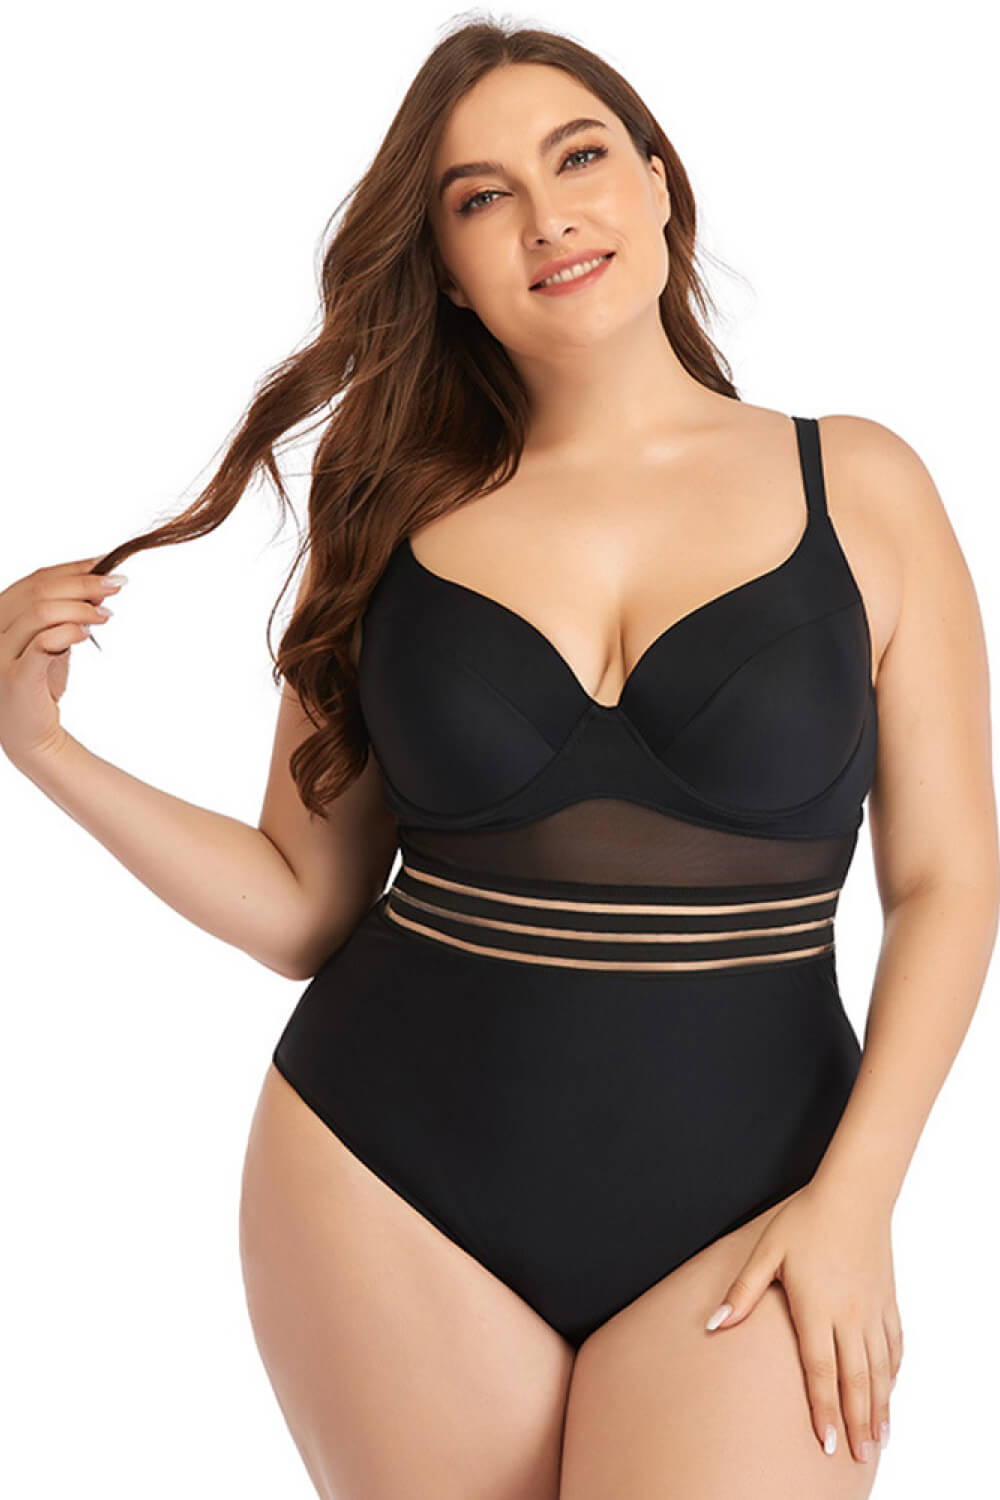 Yours Mesh Swimsuit - Black